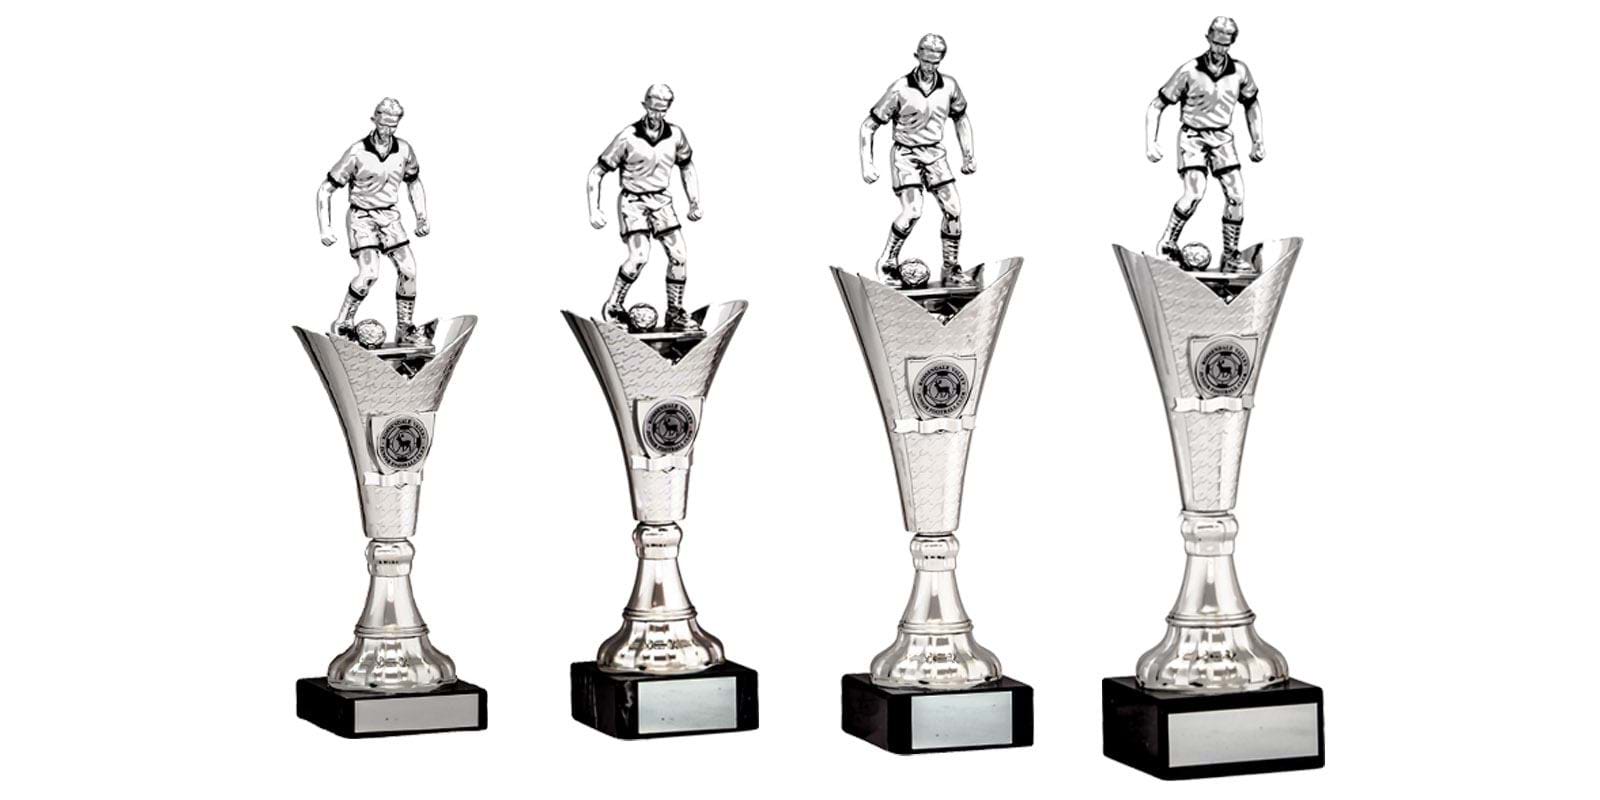 Silver Football Player on Cup Trophies 1922 Series